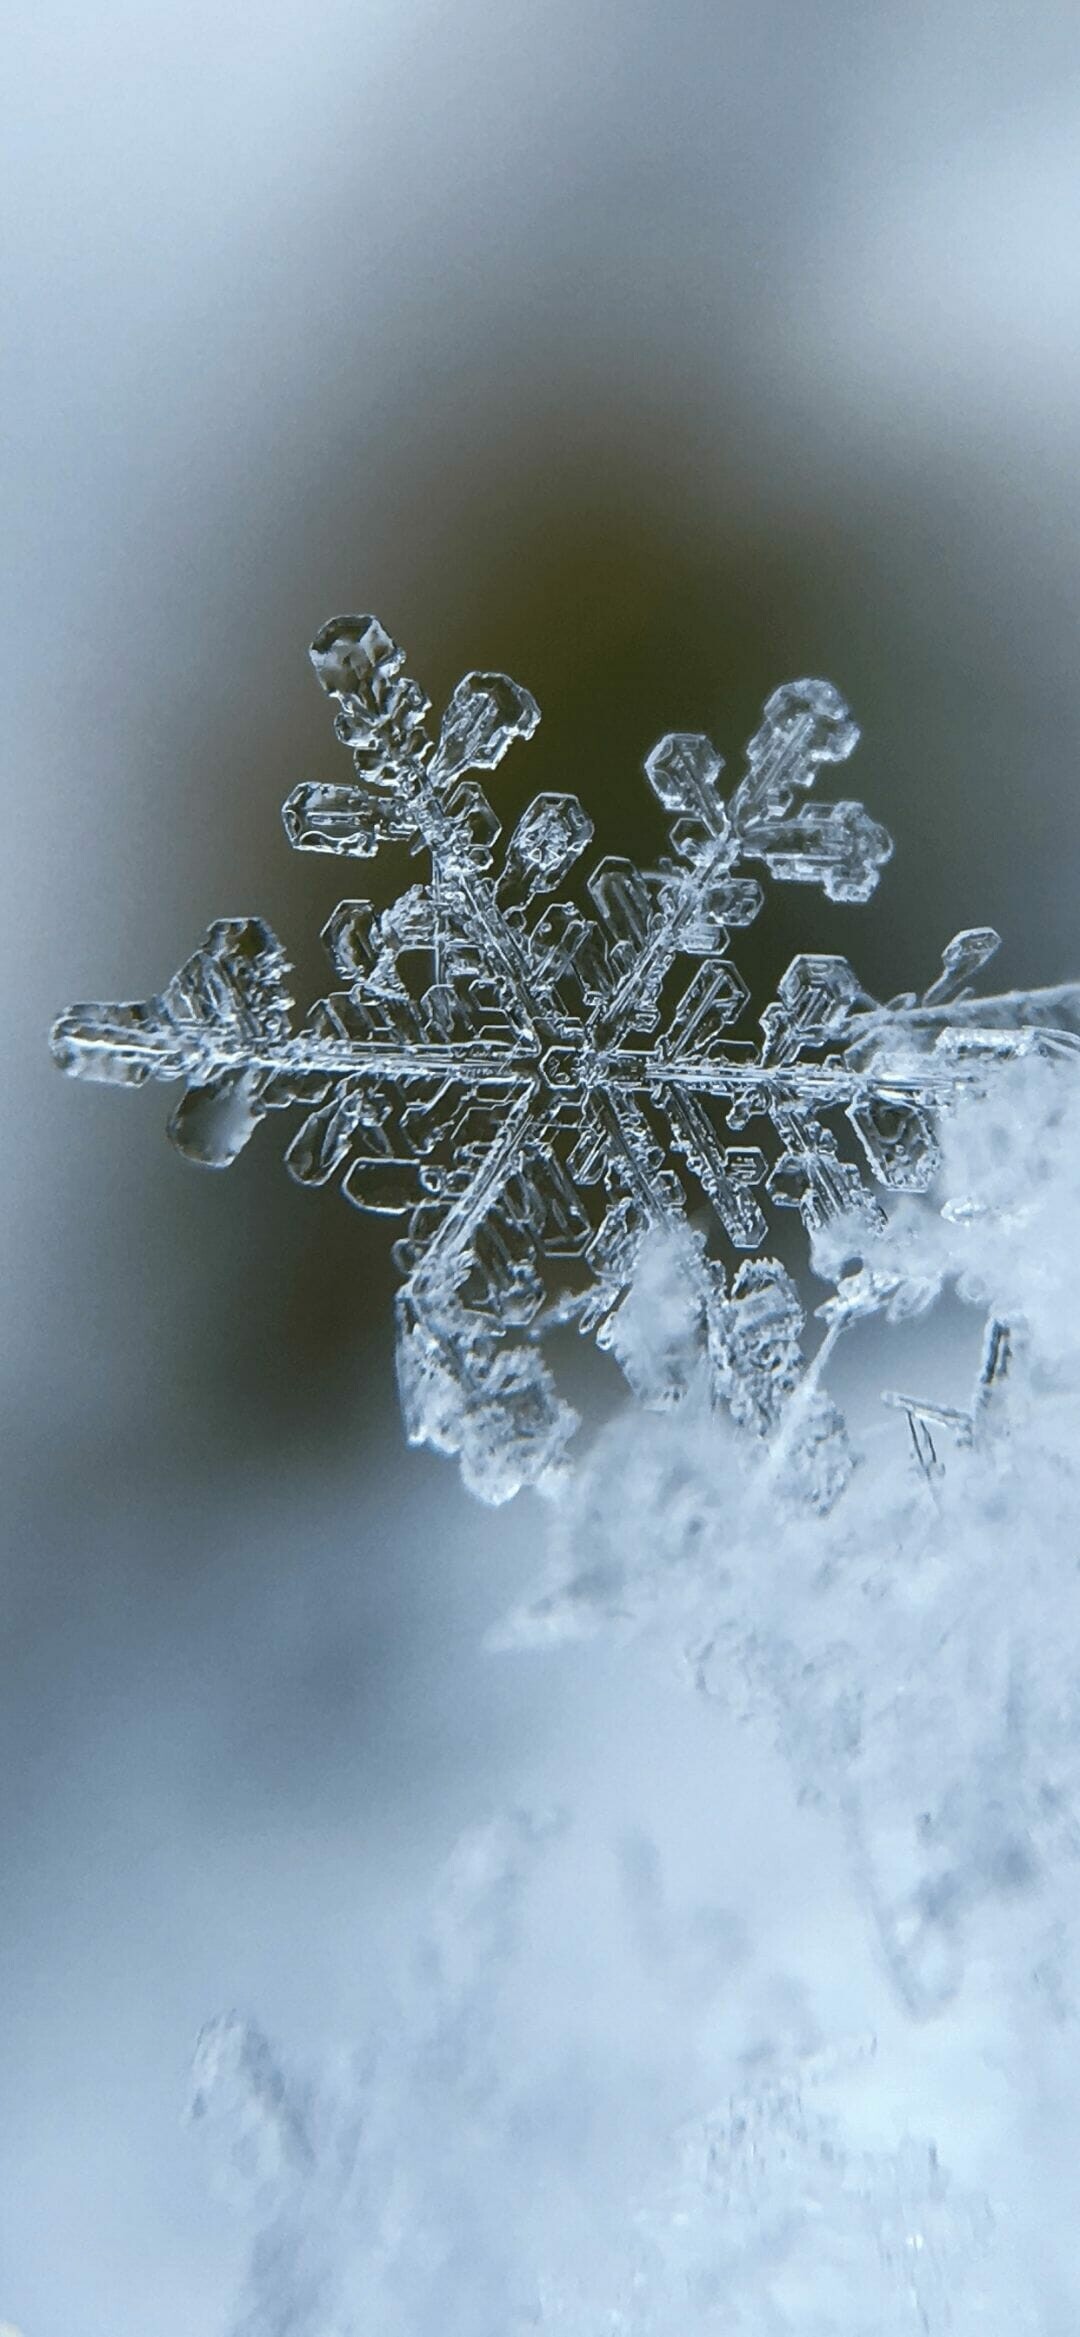 Winter: A snowflake, A single ice crystal that has achieved a sufficient size, Glacial. 1080x2340 HD Wallpaper.